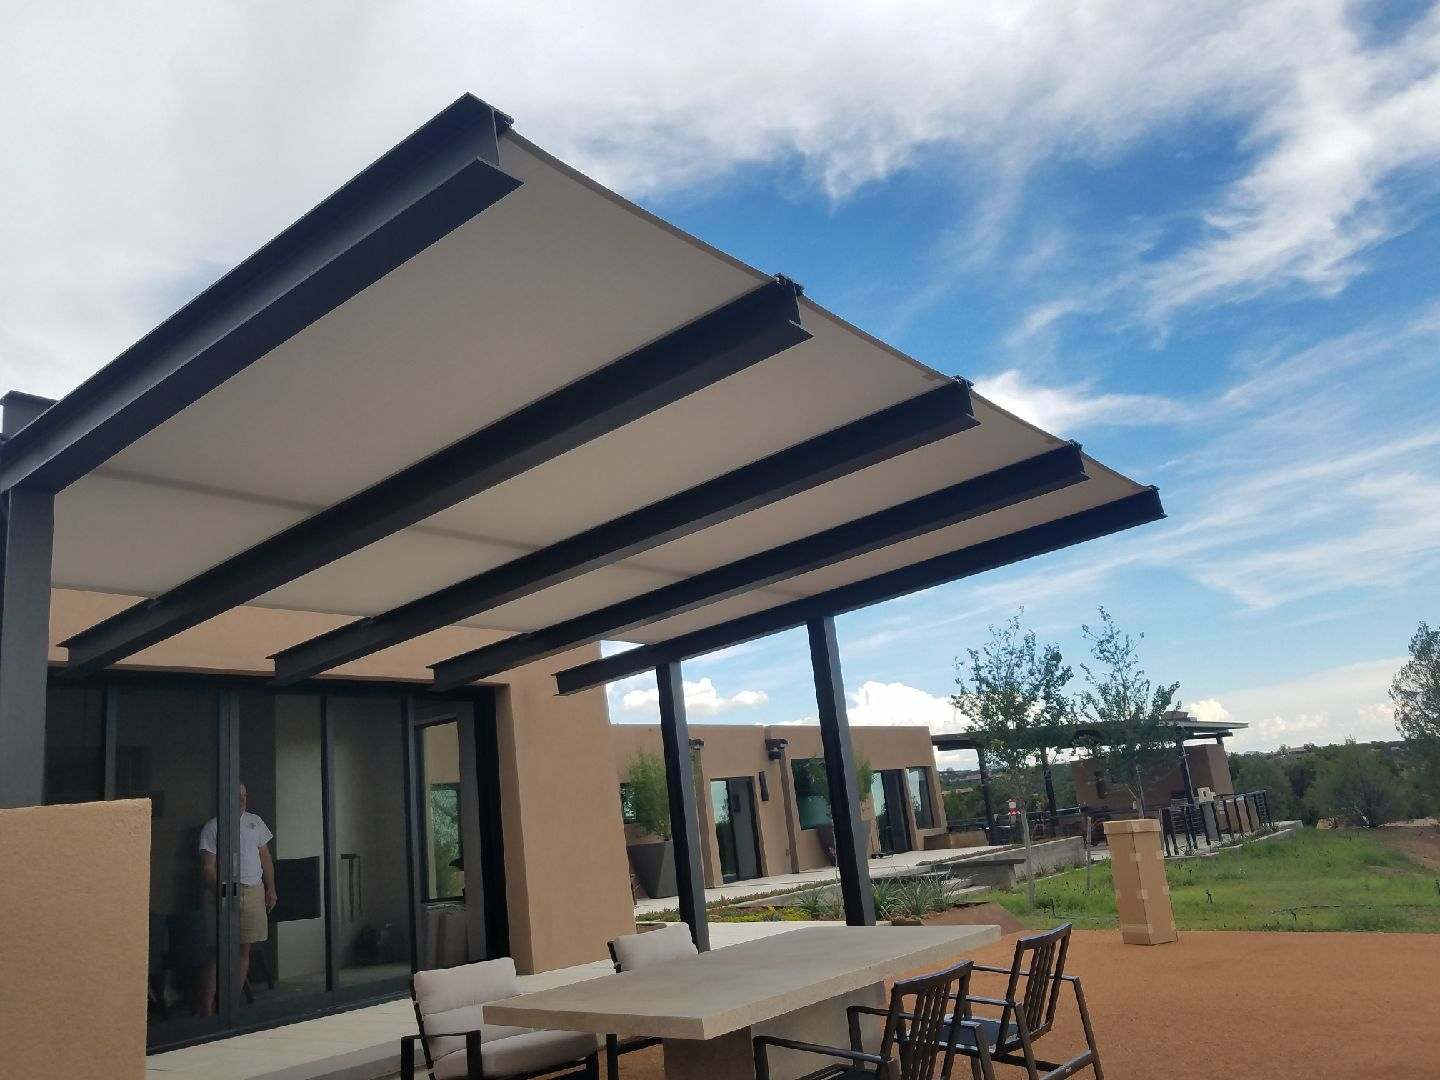 Fabric Patio Covers Albuquerque And Santa Fe inside proportions 1440 X 1080